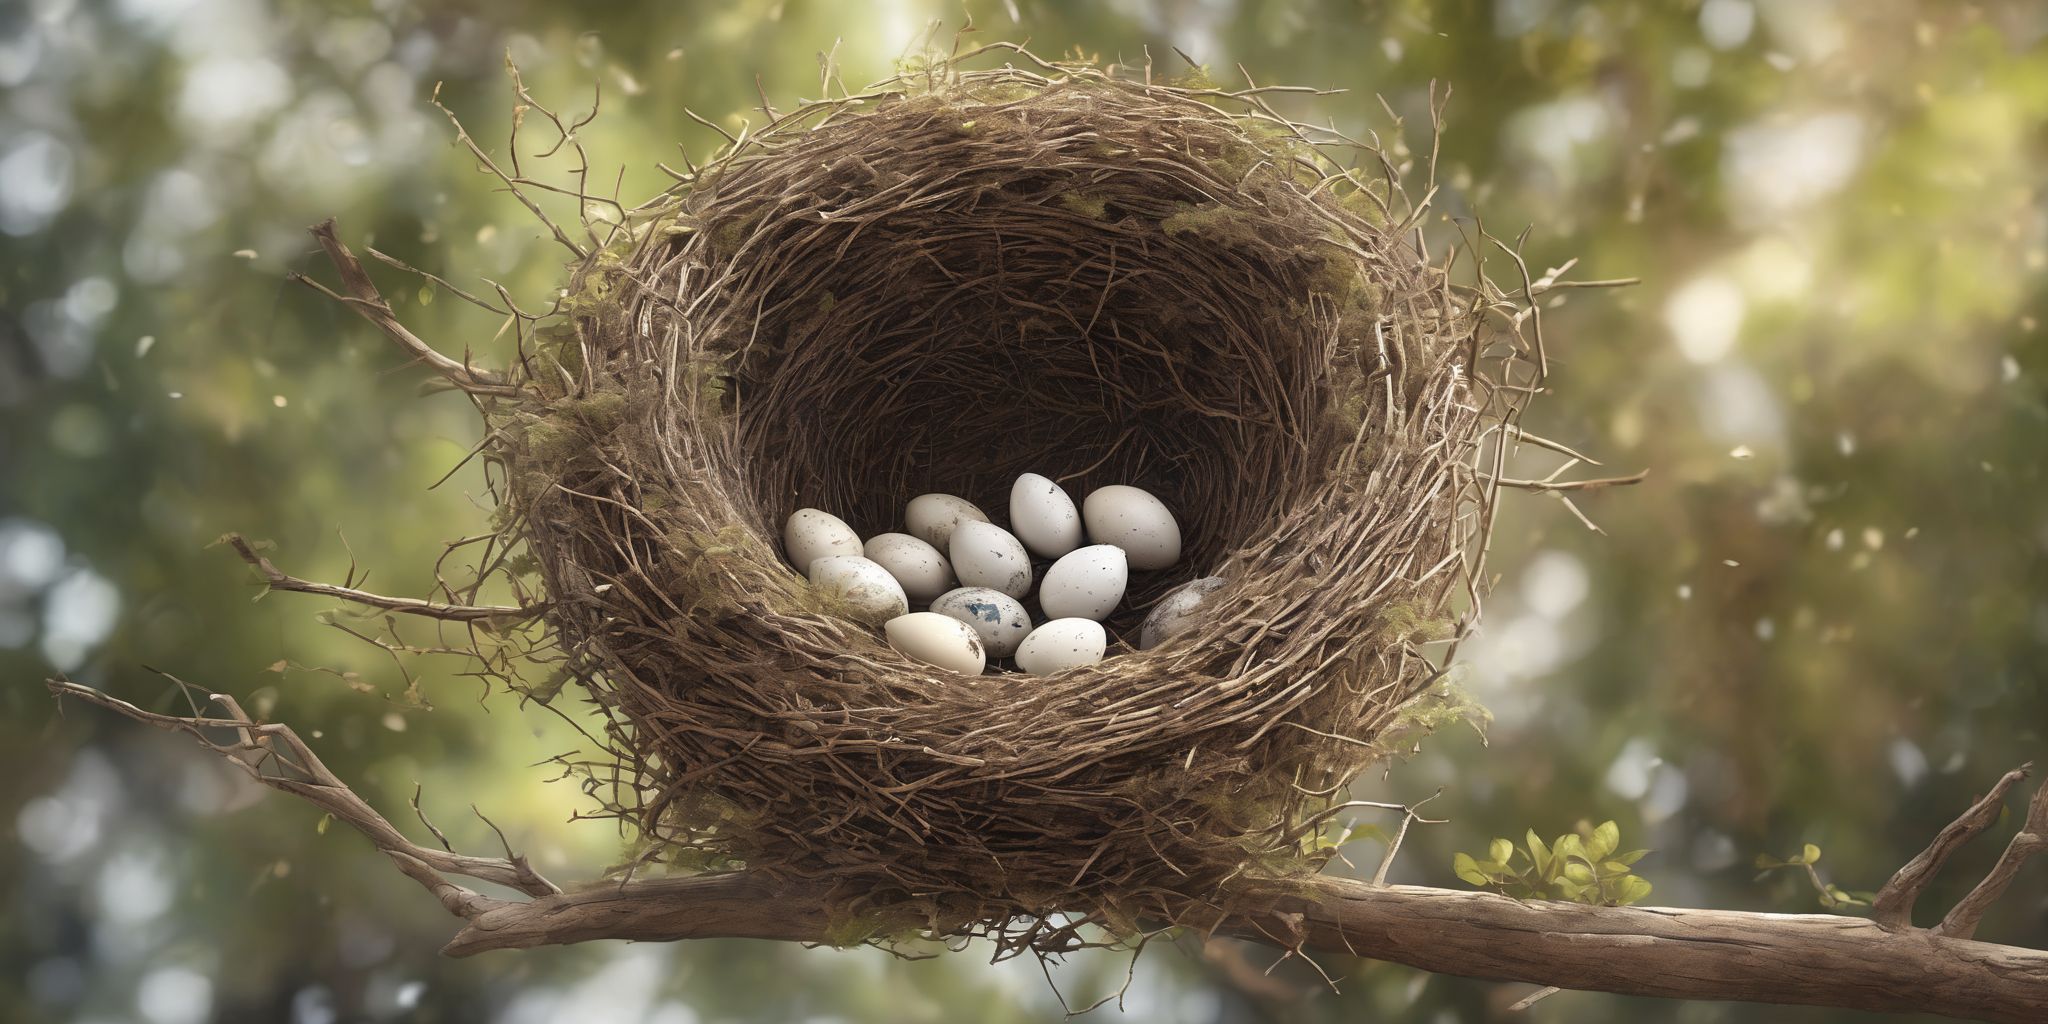 Retirement nest  in realistic, photographic style